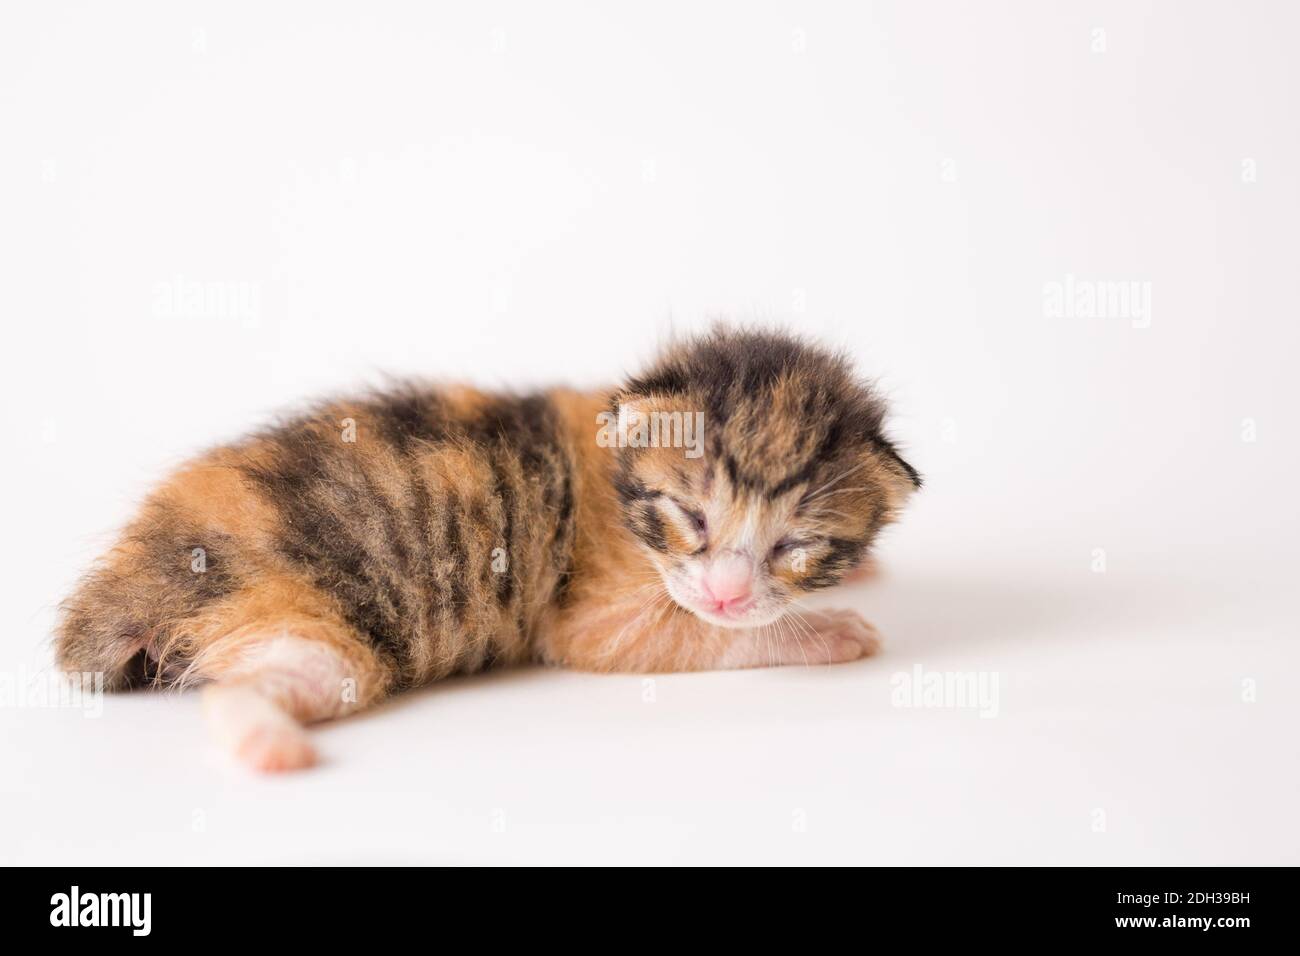 2 weeks old baby kitten on white background isolated Stock Photo